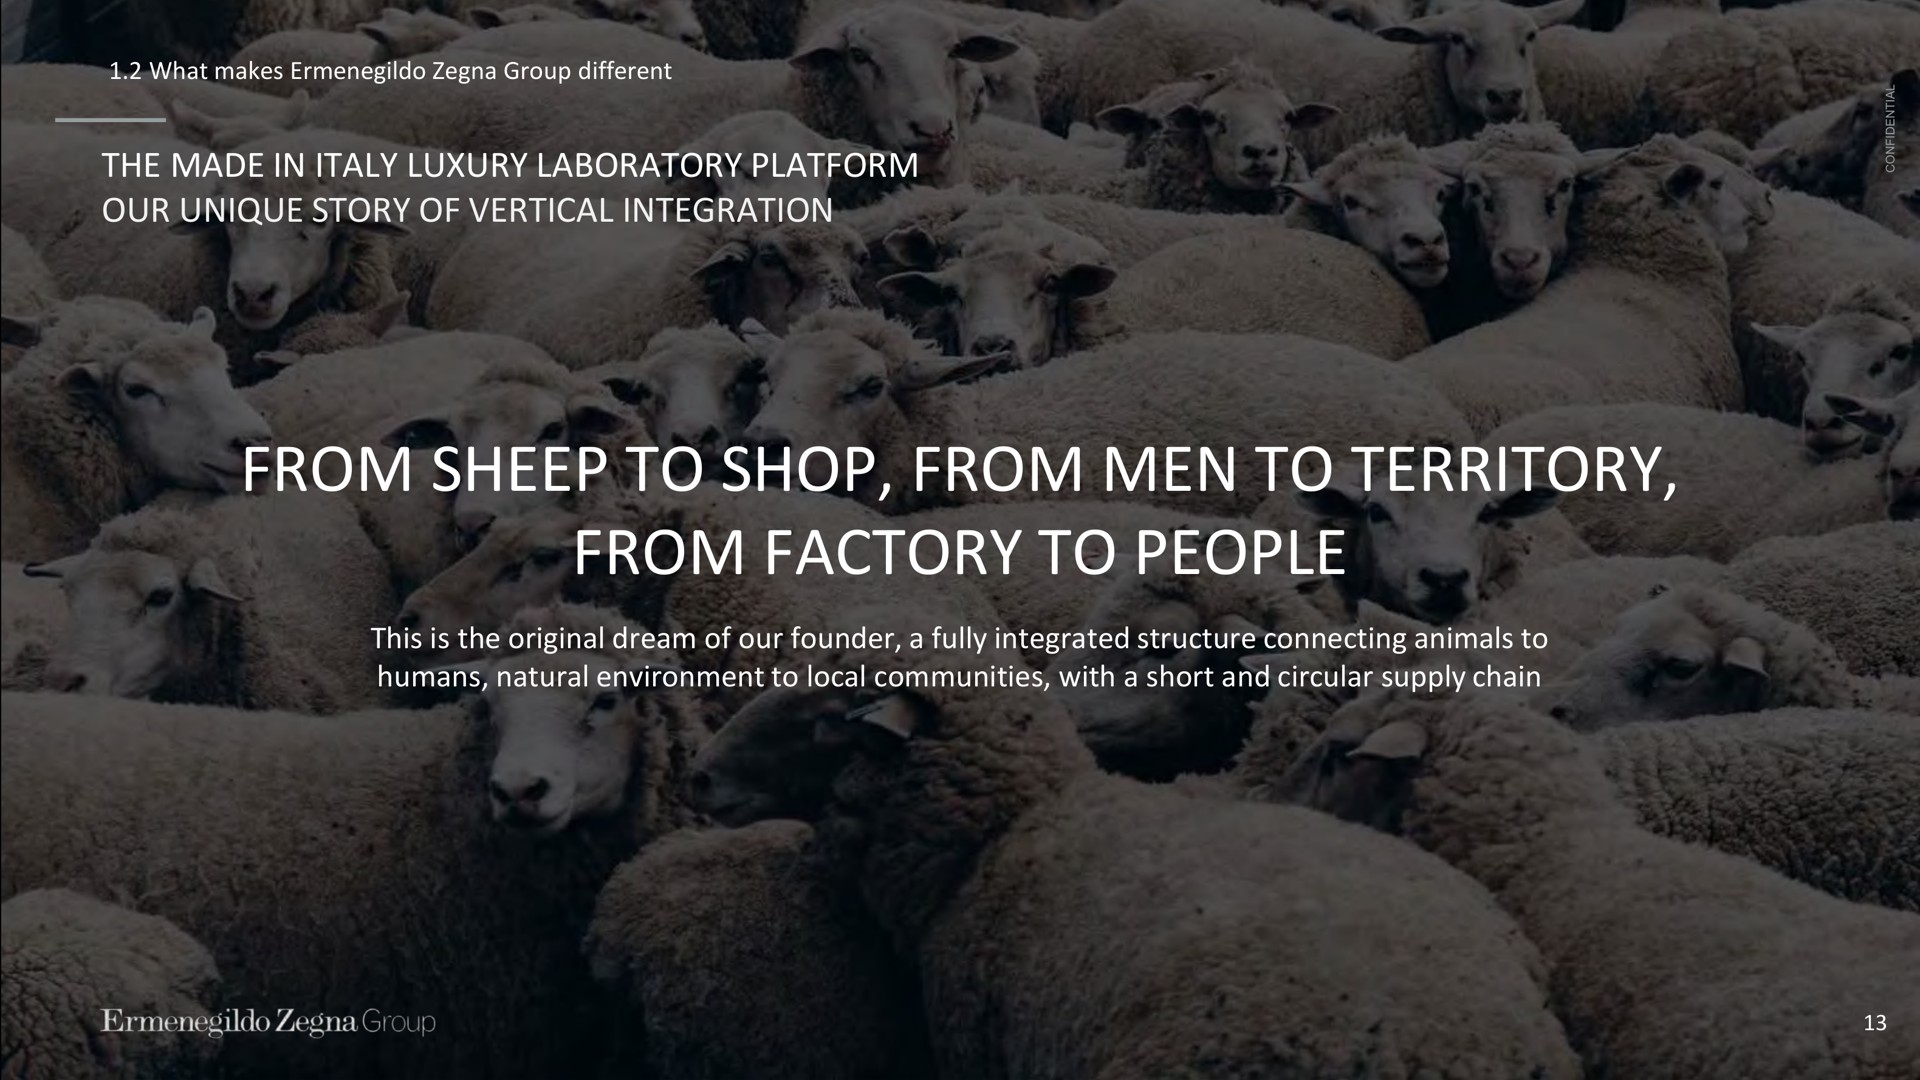 what makes group different the made in luxury laboratory platform our unique story of vertical integration from sheep to shop from men to territory from factory to people this is the original dream of our founder a fully integrated structure connecting animals to humans natural environment to local communities with a short and circular supply chain ewe | Zegna